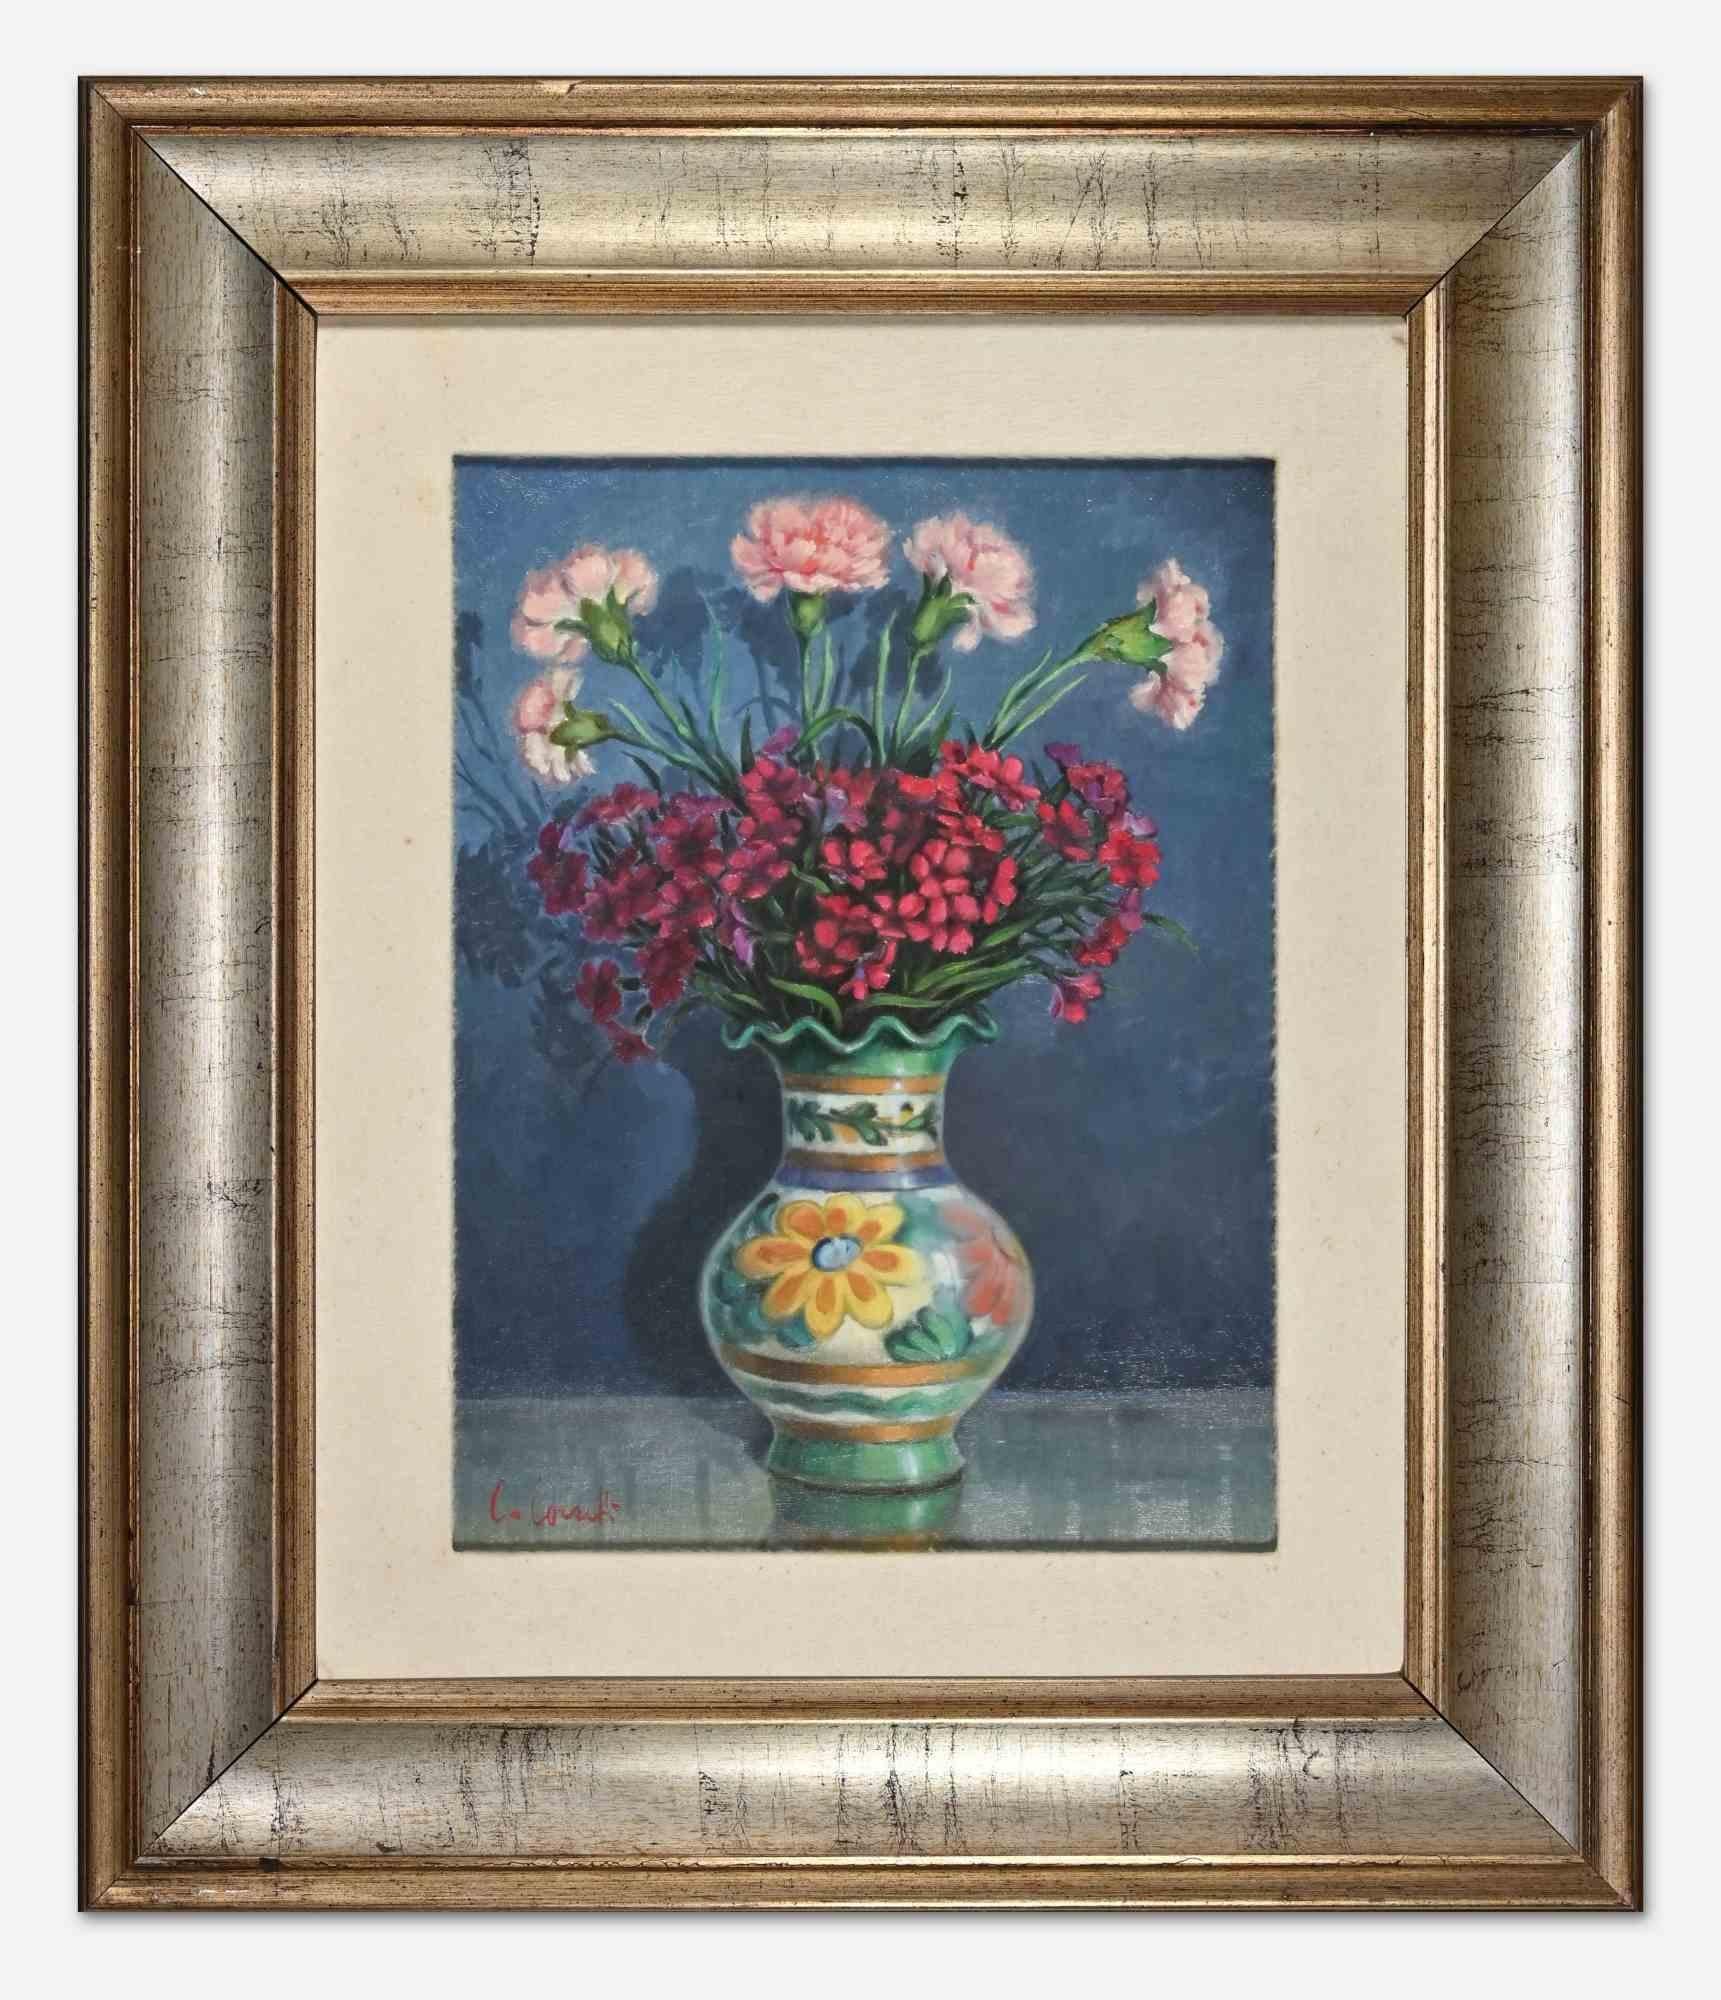 Flowers - Oil Paint by Carlo Corsetti - 1970s